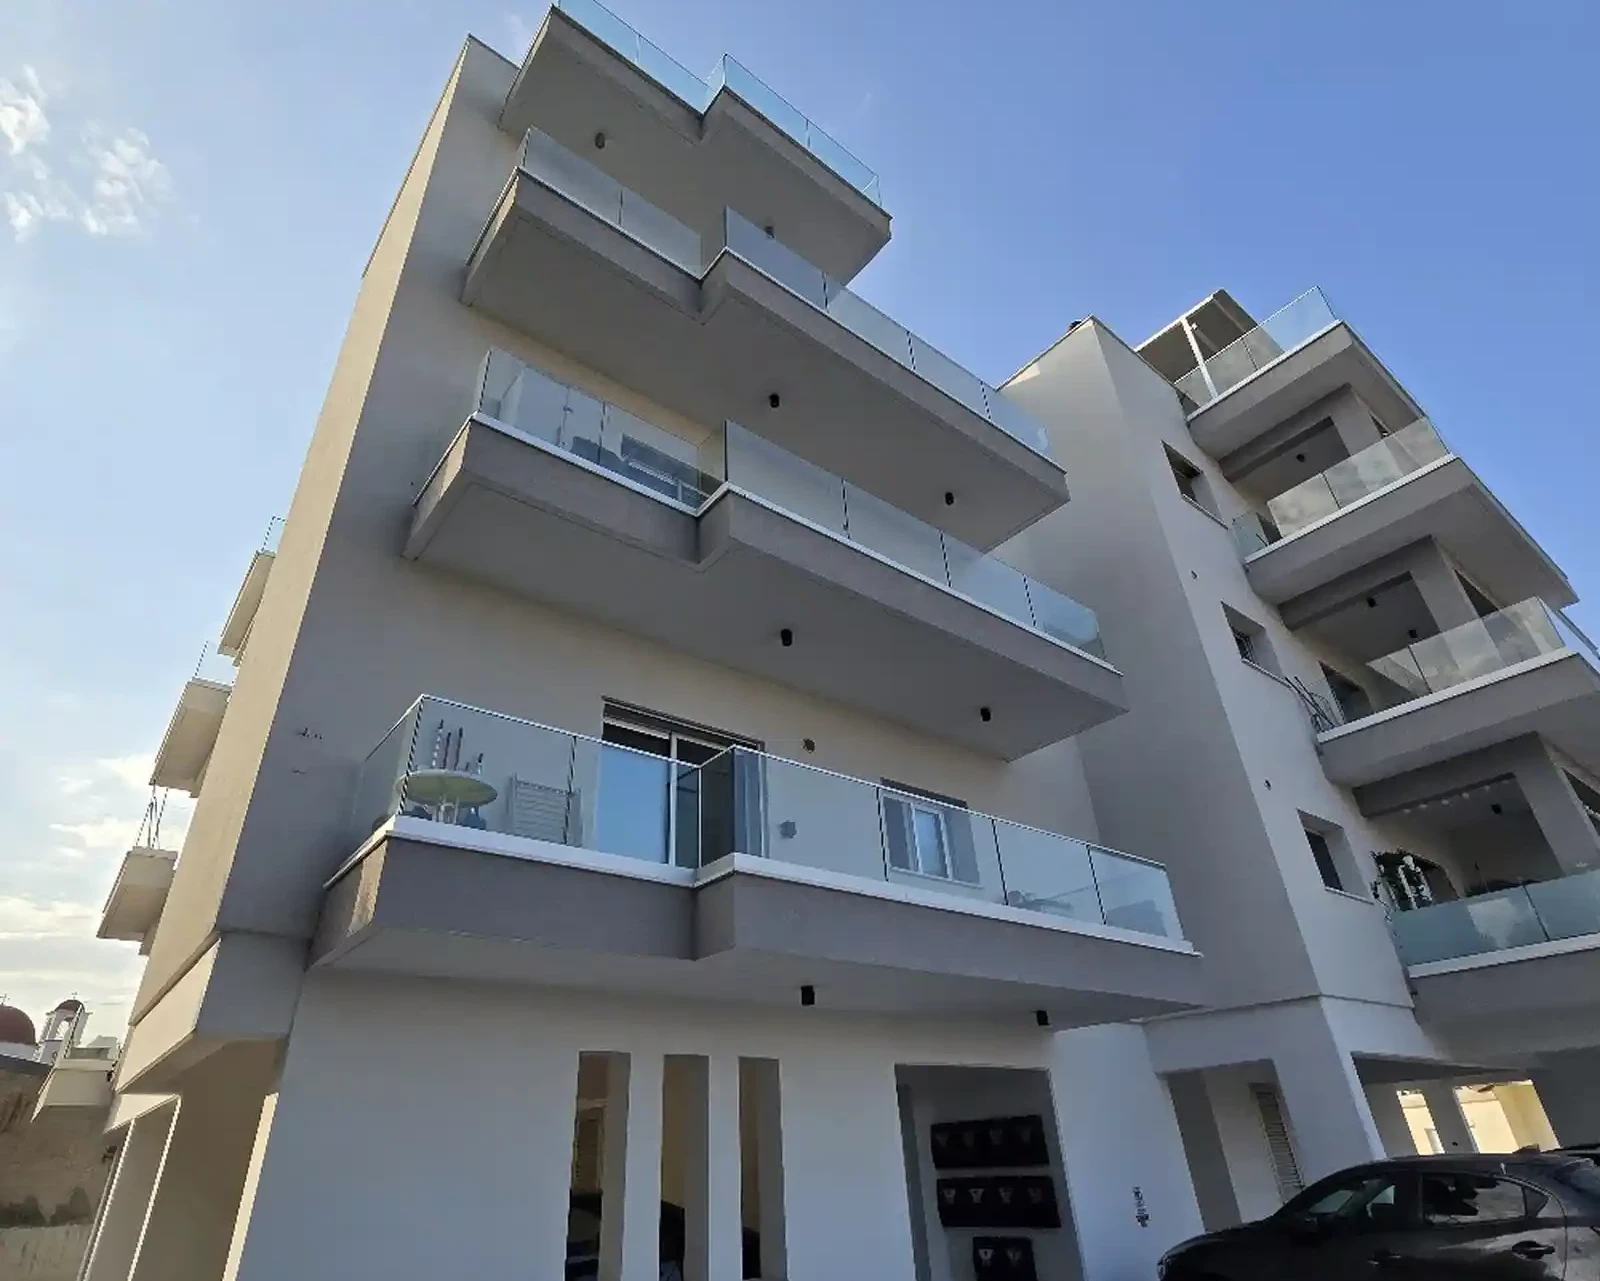 3-bedroom apartment to rent €2.000, image 1